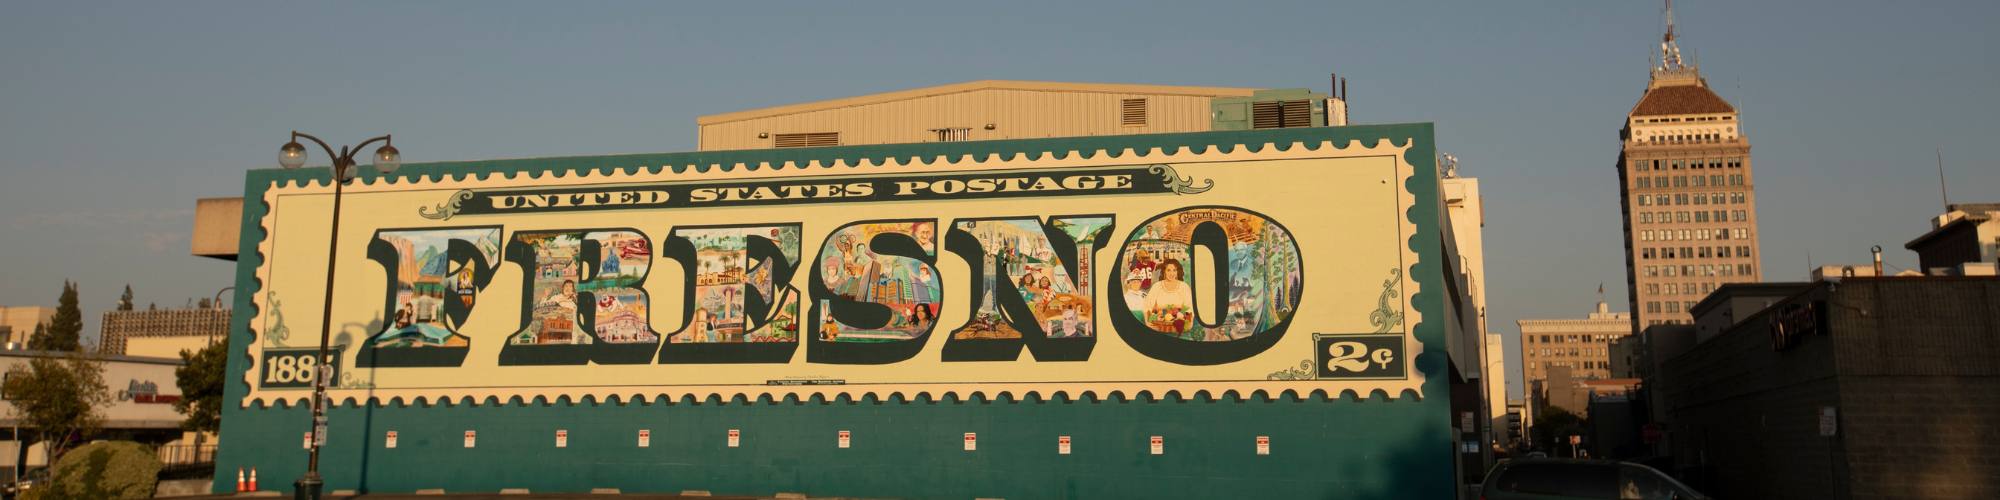 A mural depicting a large postage stamp with the text "Fresno" is painted on a building wall in an urban area with another building in the background.